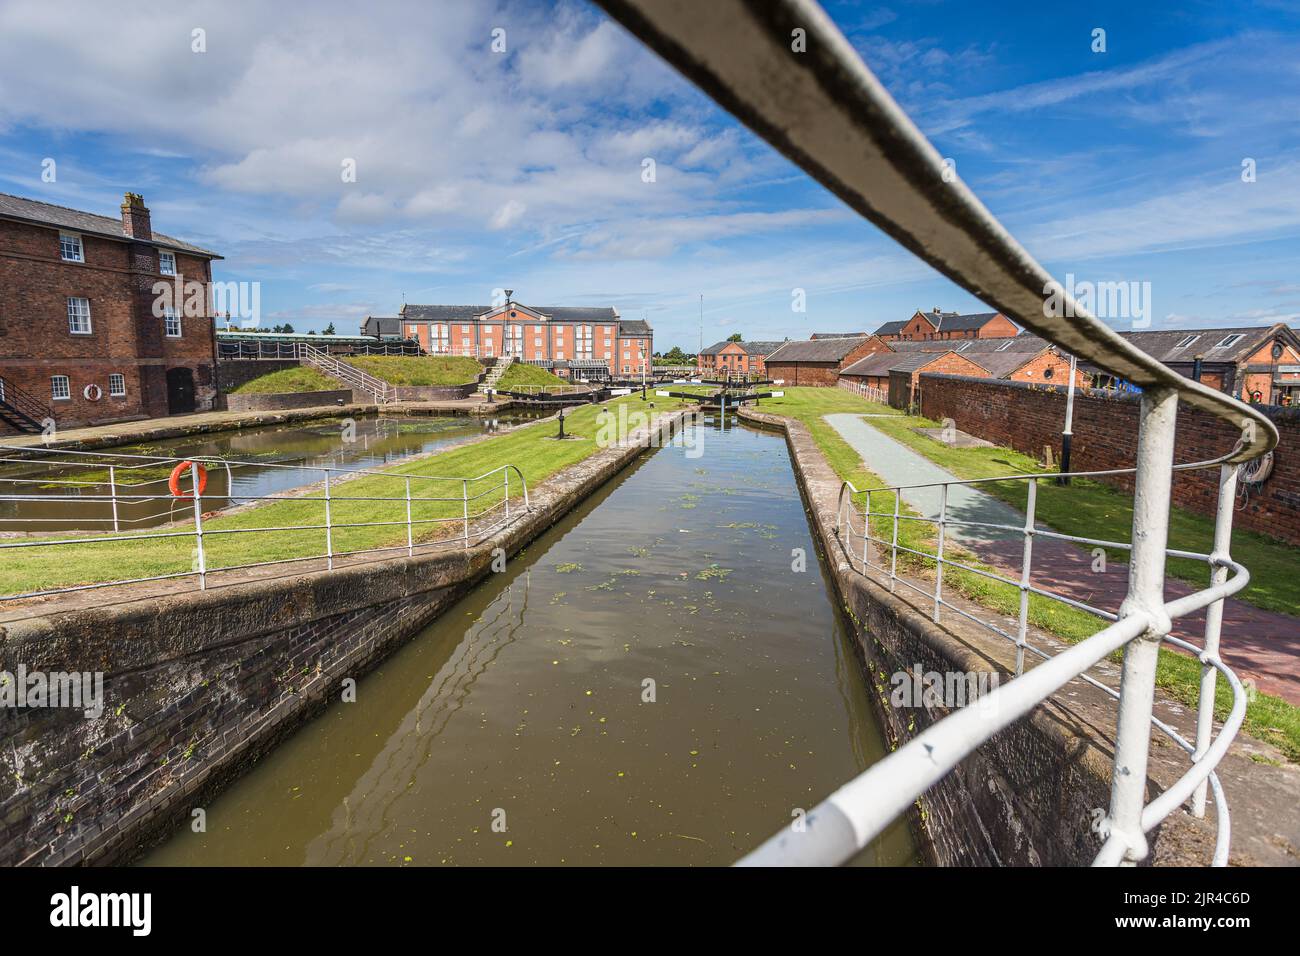 Looking along the railings which enclose one of the canal locks at Ellesmere Port, Cheshire seen in August 2022. Stock Photo